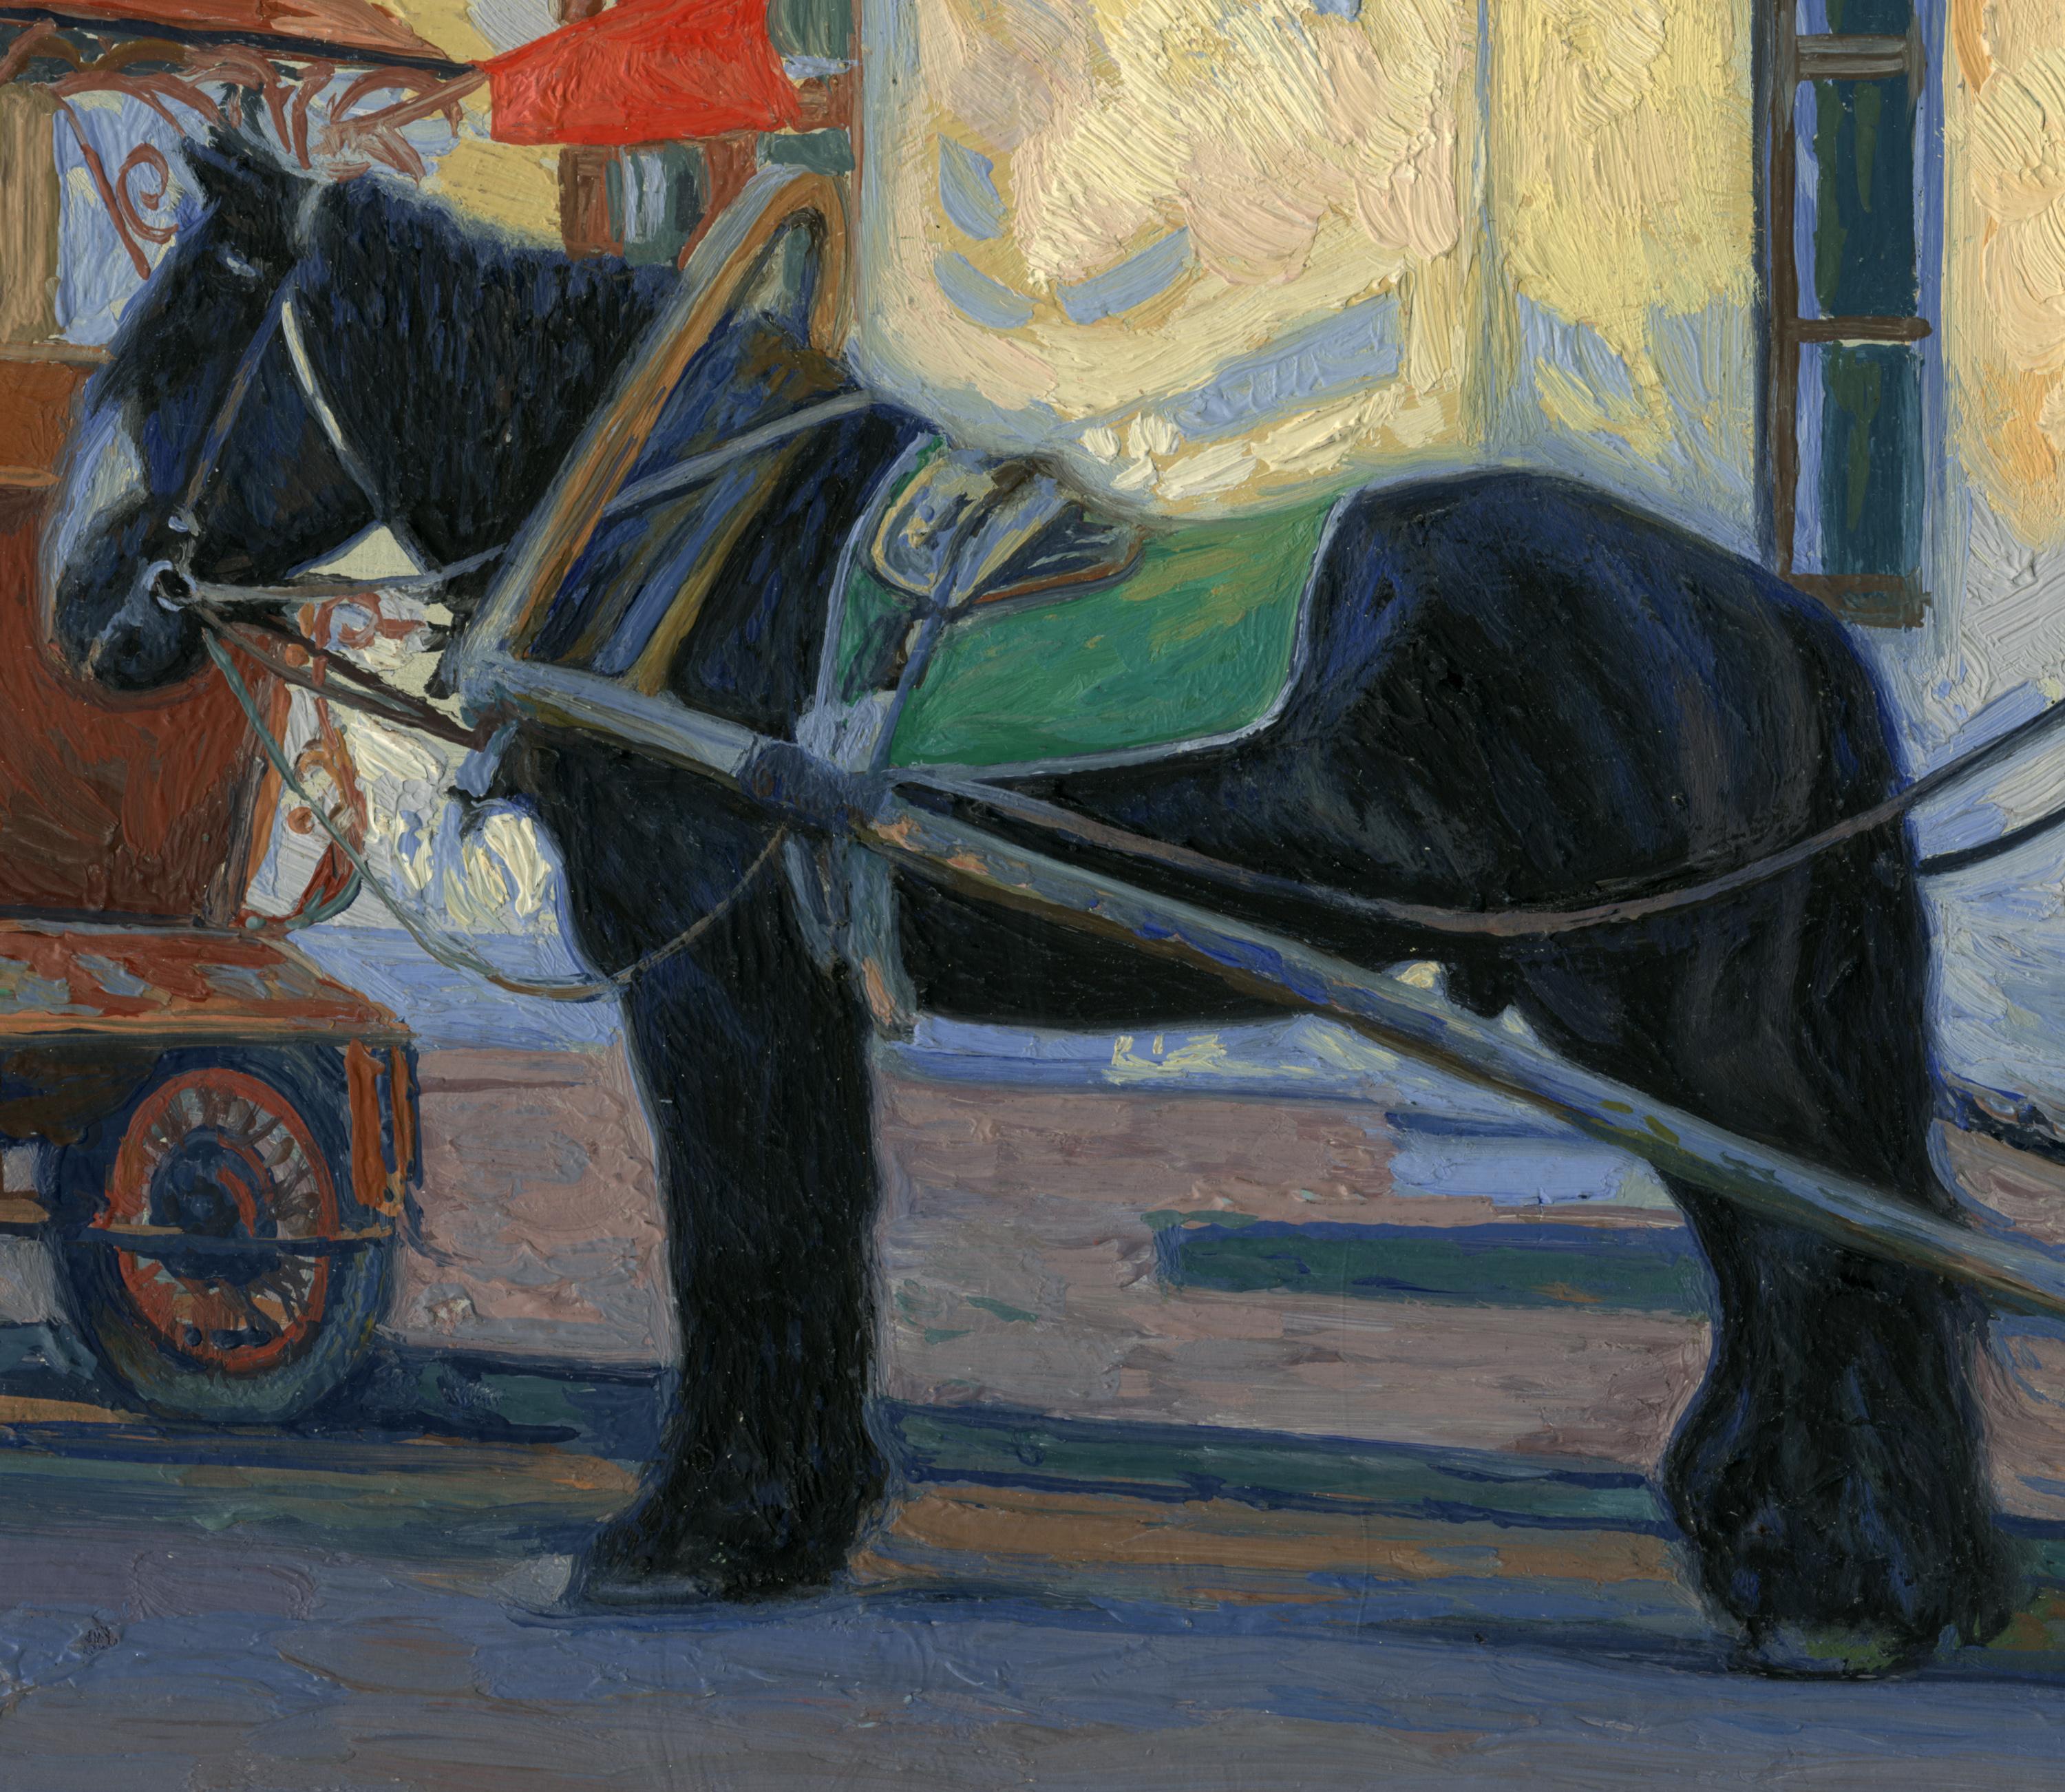 The cart with the horse. Suzdal - Painting by Simon Kozhin